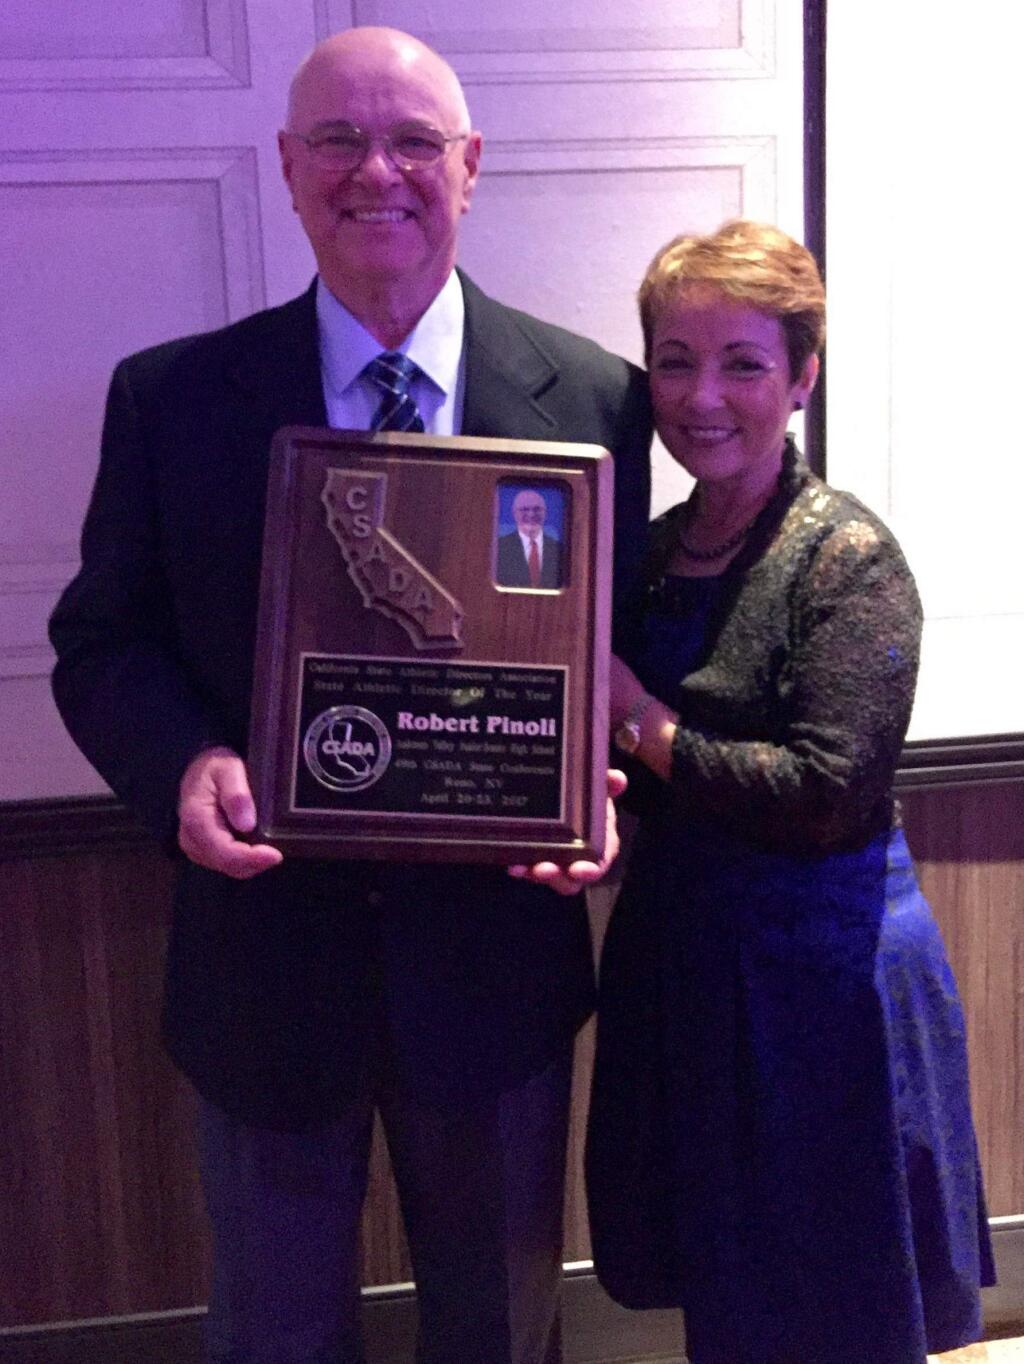 Robert Pinoli and his wife, Cecilia, pose with a plaque recognizing Robert Pinoli as California's Athletic Director of the Year.